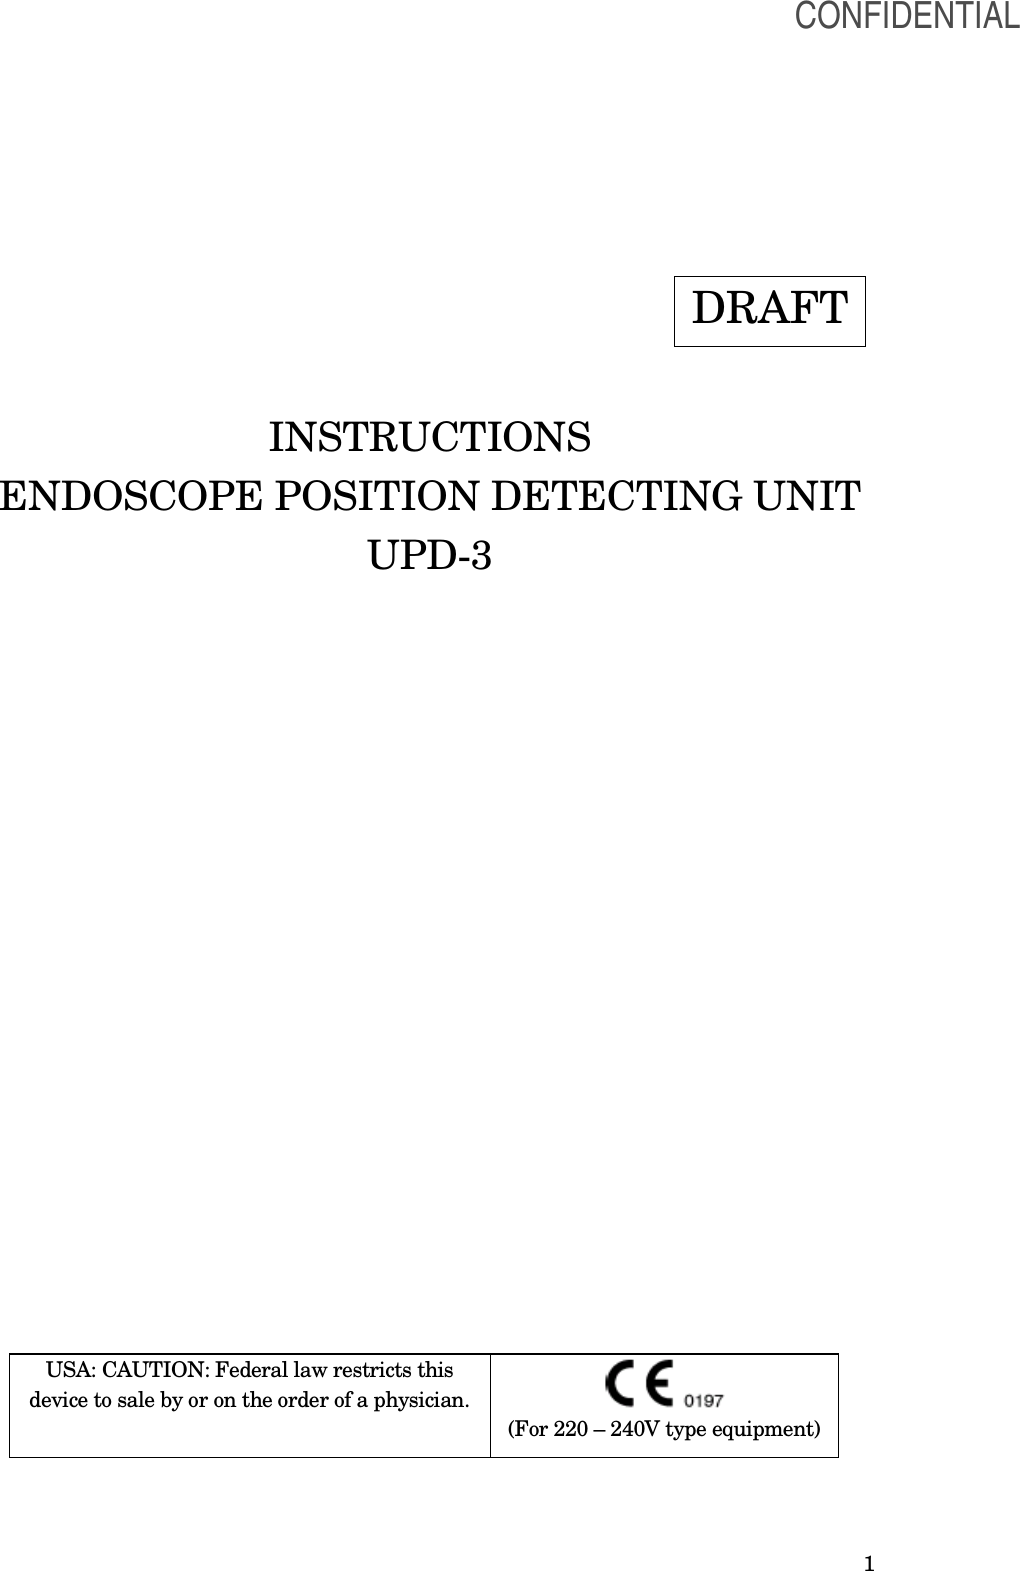  1  DRAFT  INSTRUCTIONS ENDOSCOPE POSITION DETECTING UNIT UPD-3              USA: CAUTION: Federal law restricts this device to sale by or on the order of a physician.   (For 220 – 240V type equipment) CONFIDENTIAL